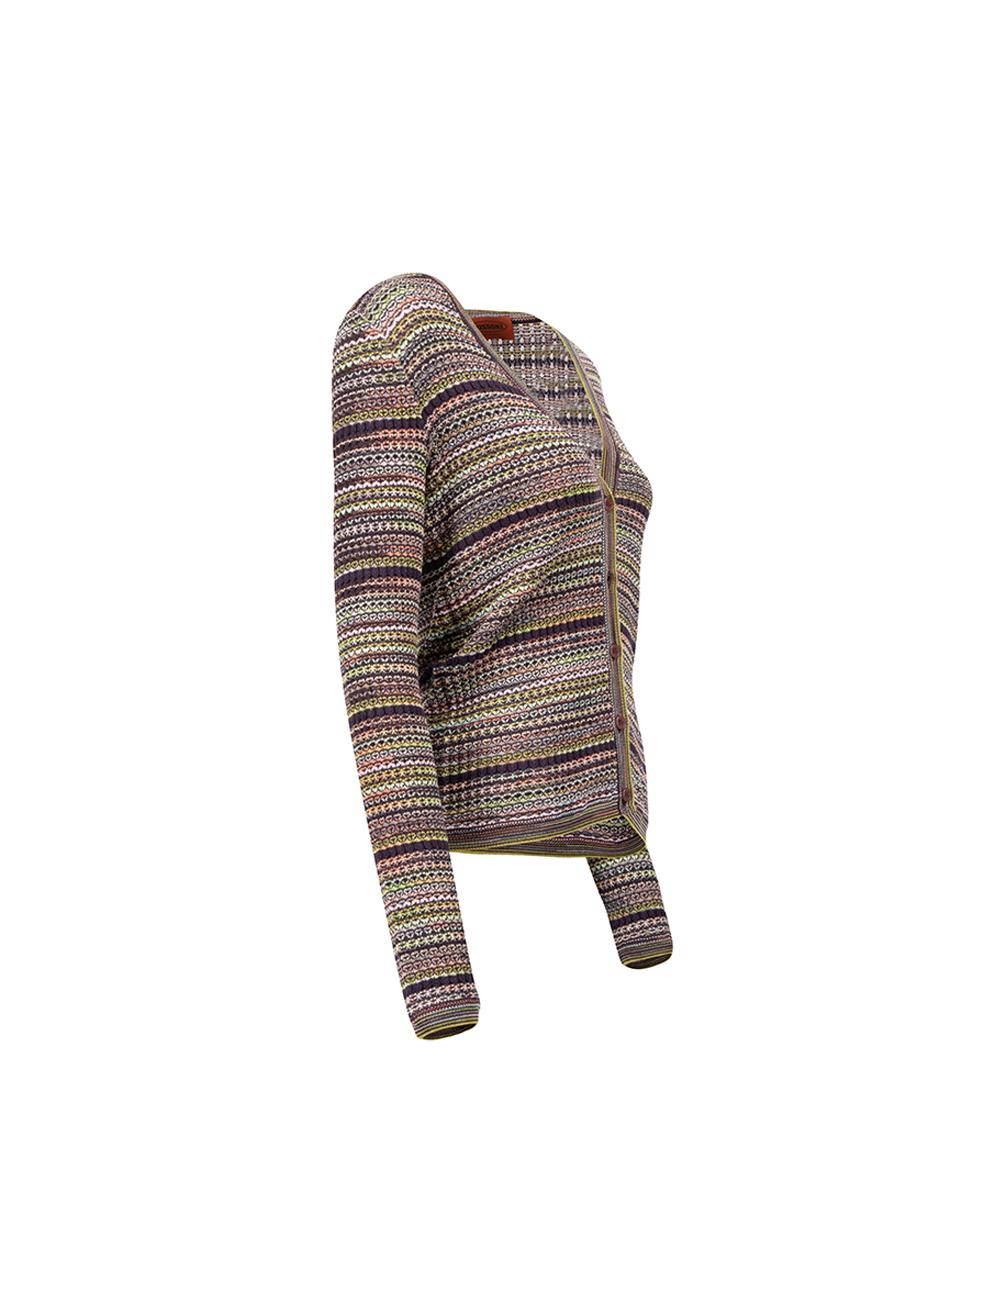 CONDITION is Very good. Hardly any visible wear to cardigan is evident on this used Missoni designer resale item. 



Details


Multicolour

Wool

Knit cardigan

Striped pattern

Button up closure

Long sleeves





Made in Italy



Composition

50%